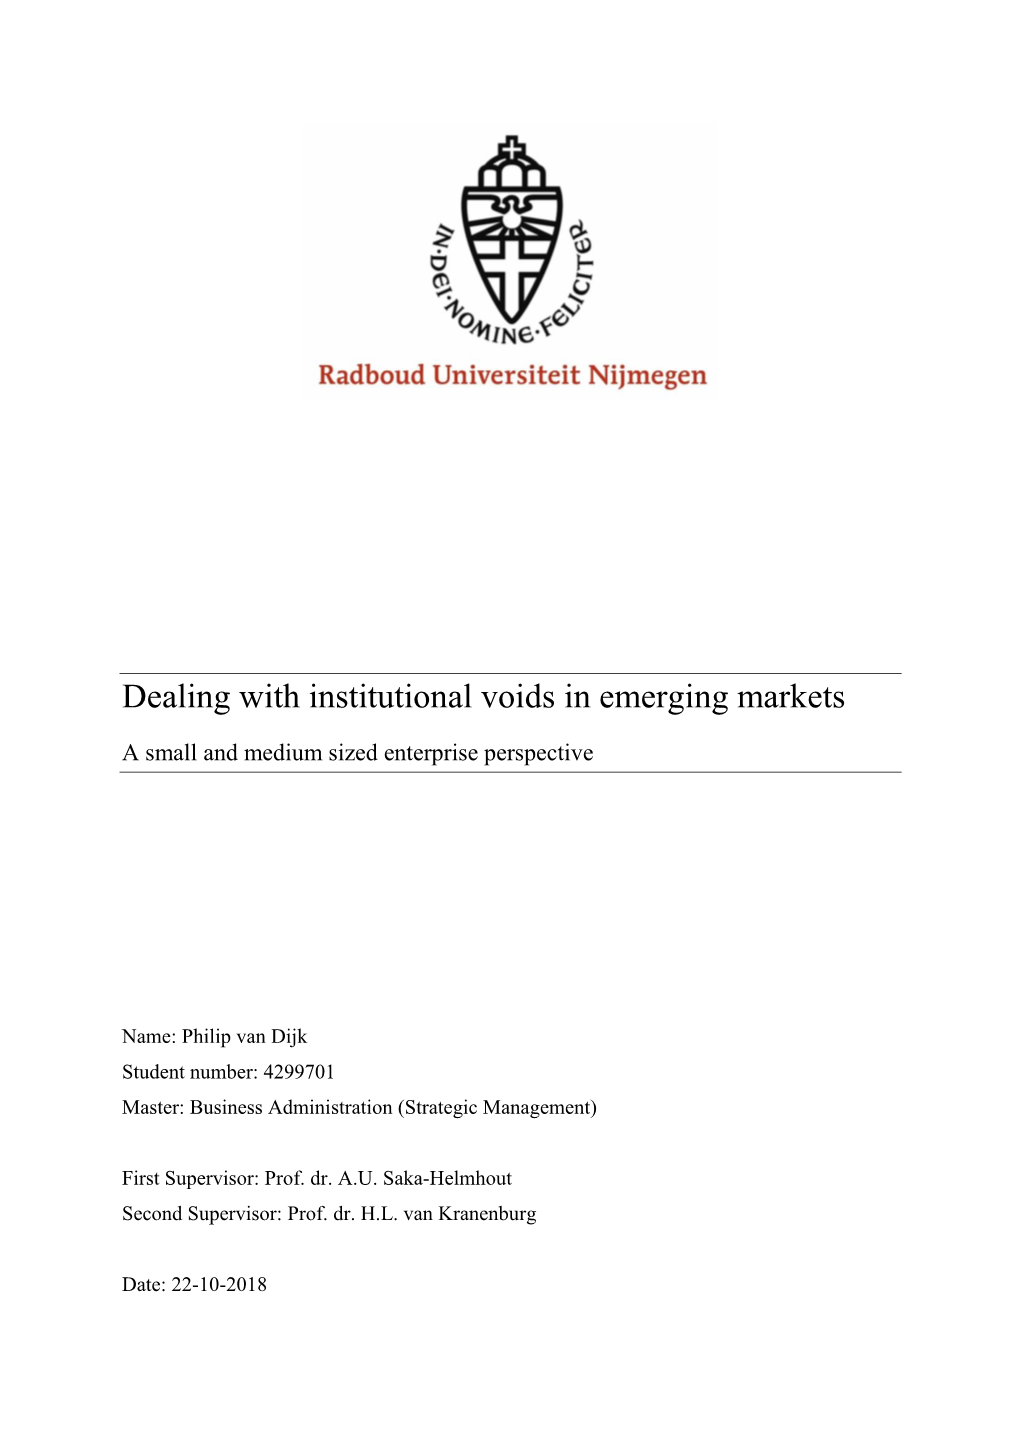 Dealing with Institutional Voids in Emerging Markets